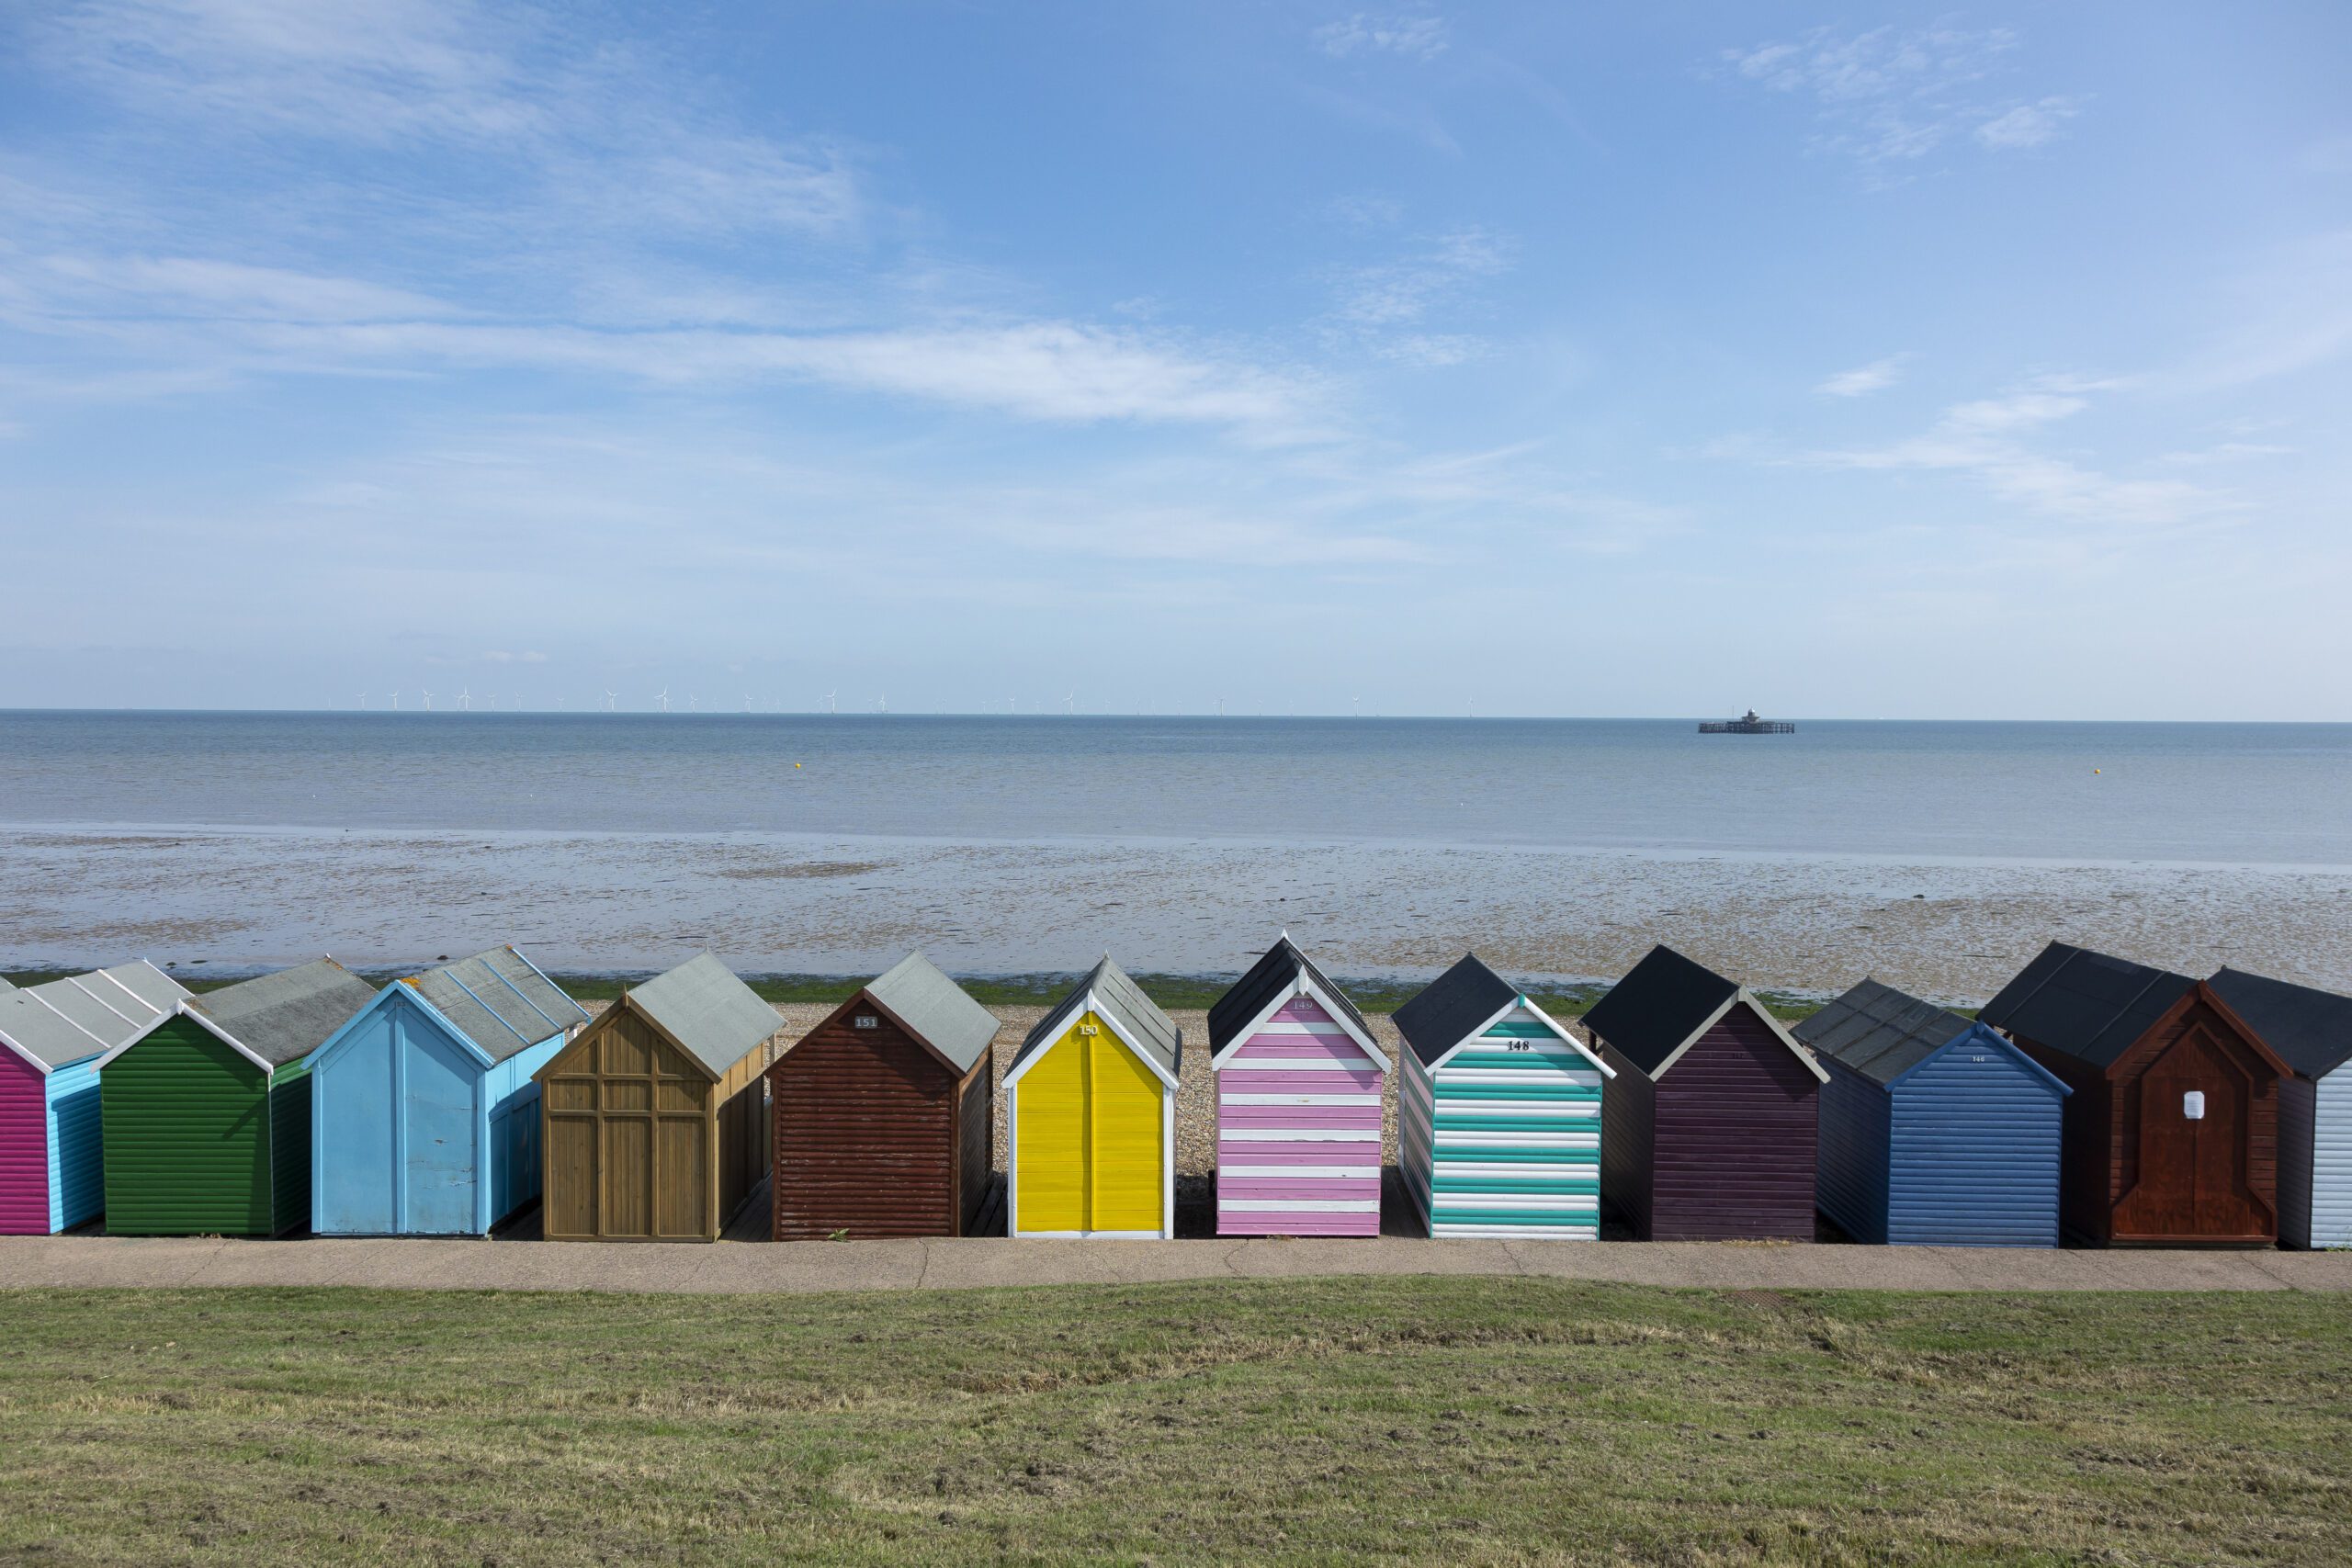 Colourful beach huts in Herne Bay